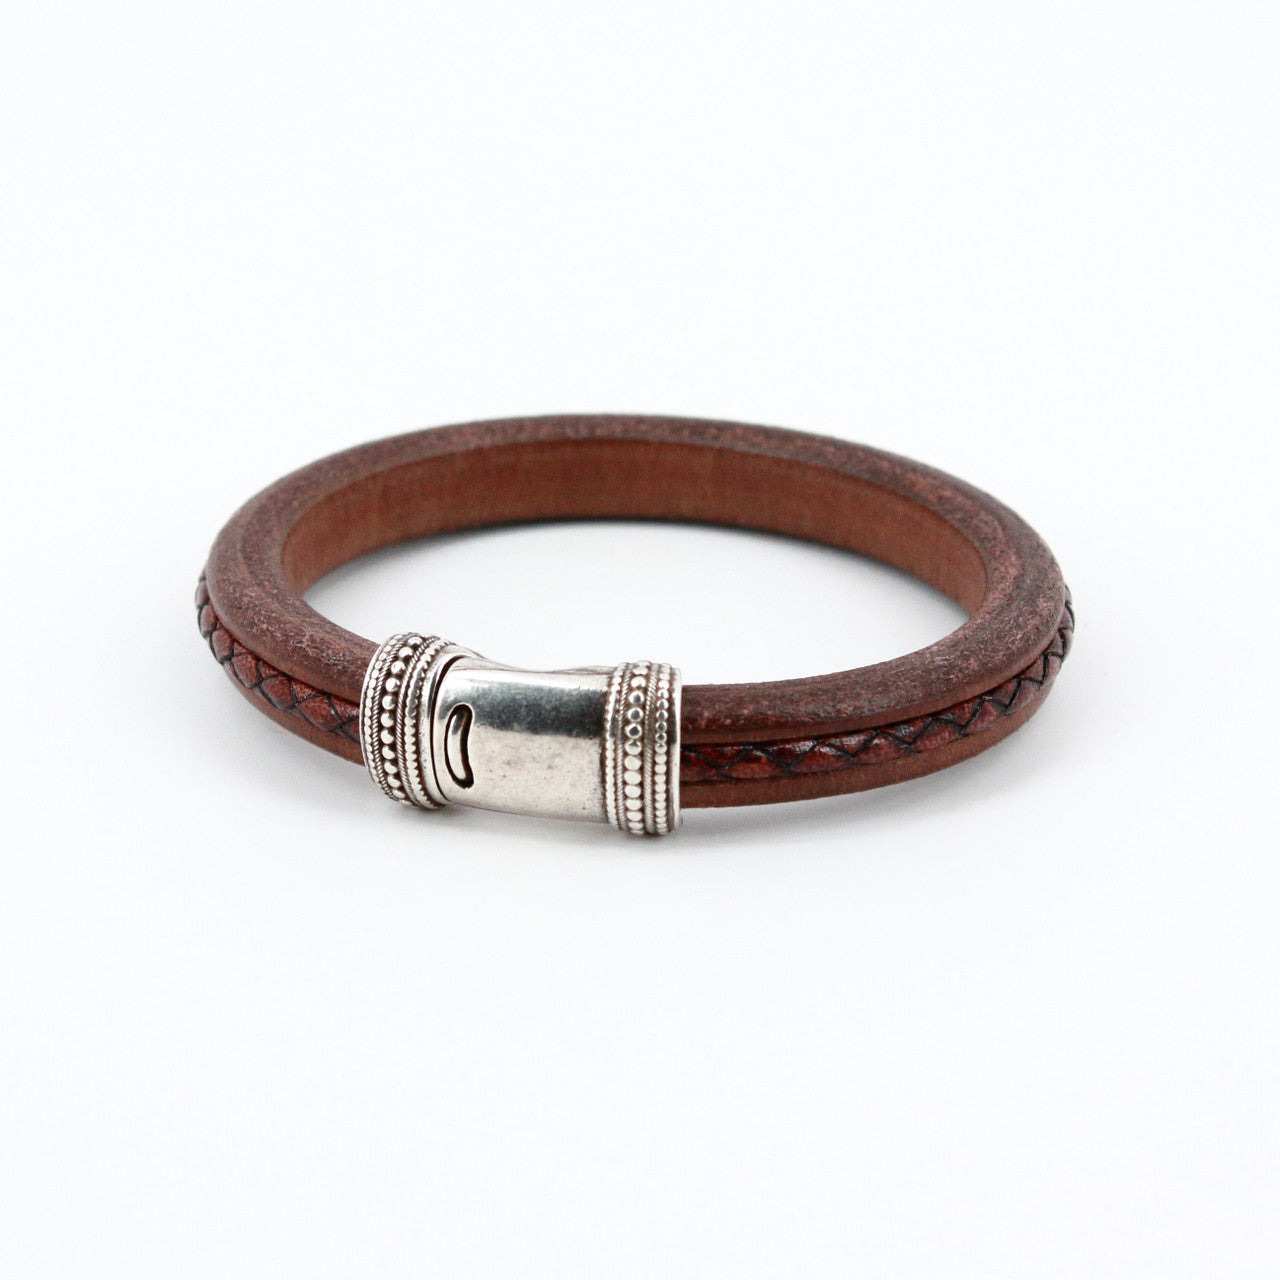 Amazon.com: Wide leather bracelet - Leather cuff bracelet for man or woman  - Wide wristband cuff, Handmade UA 3035 : Handmade Products